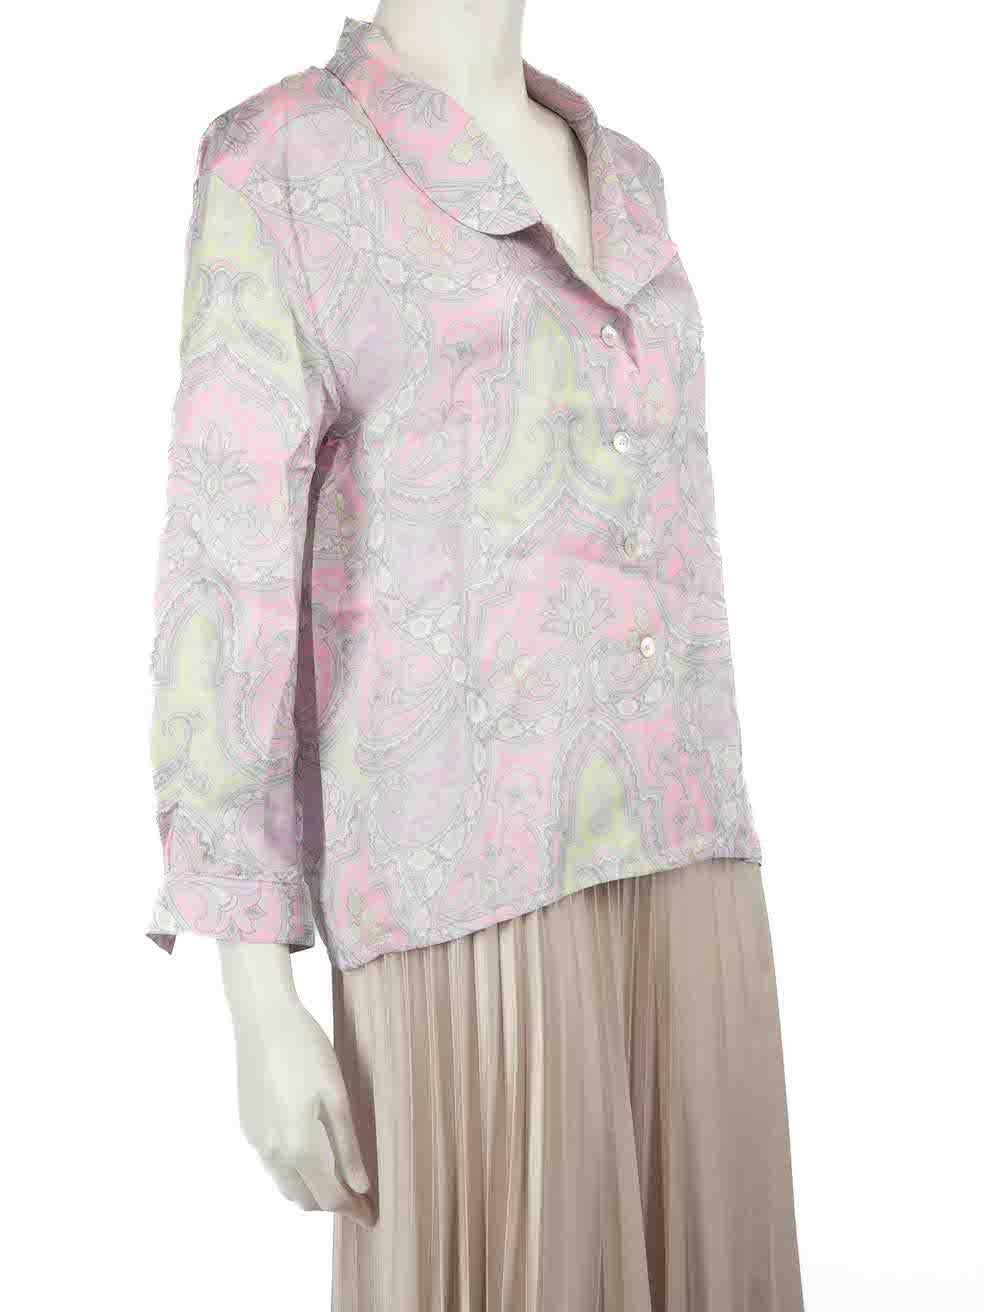 CONDITION is Very good. Hardly any visible wear to shirt is evident on this used Céline designer resale item.
 
 
 
 Details
 
 
 Pink
 
 Silk
 
 Blouse
 
 Floral print
 
 Long sleeves
 
 Button up fastening
 
 Buttoned cuffs
 
 
 
 
 
 Made in